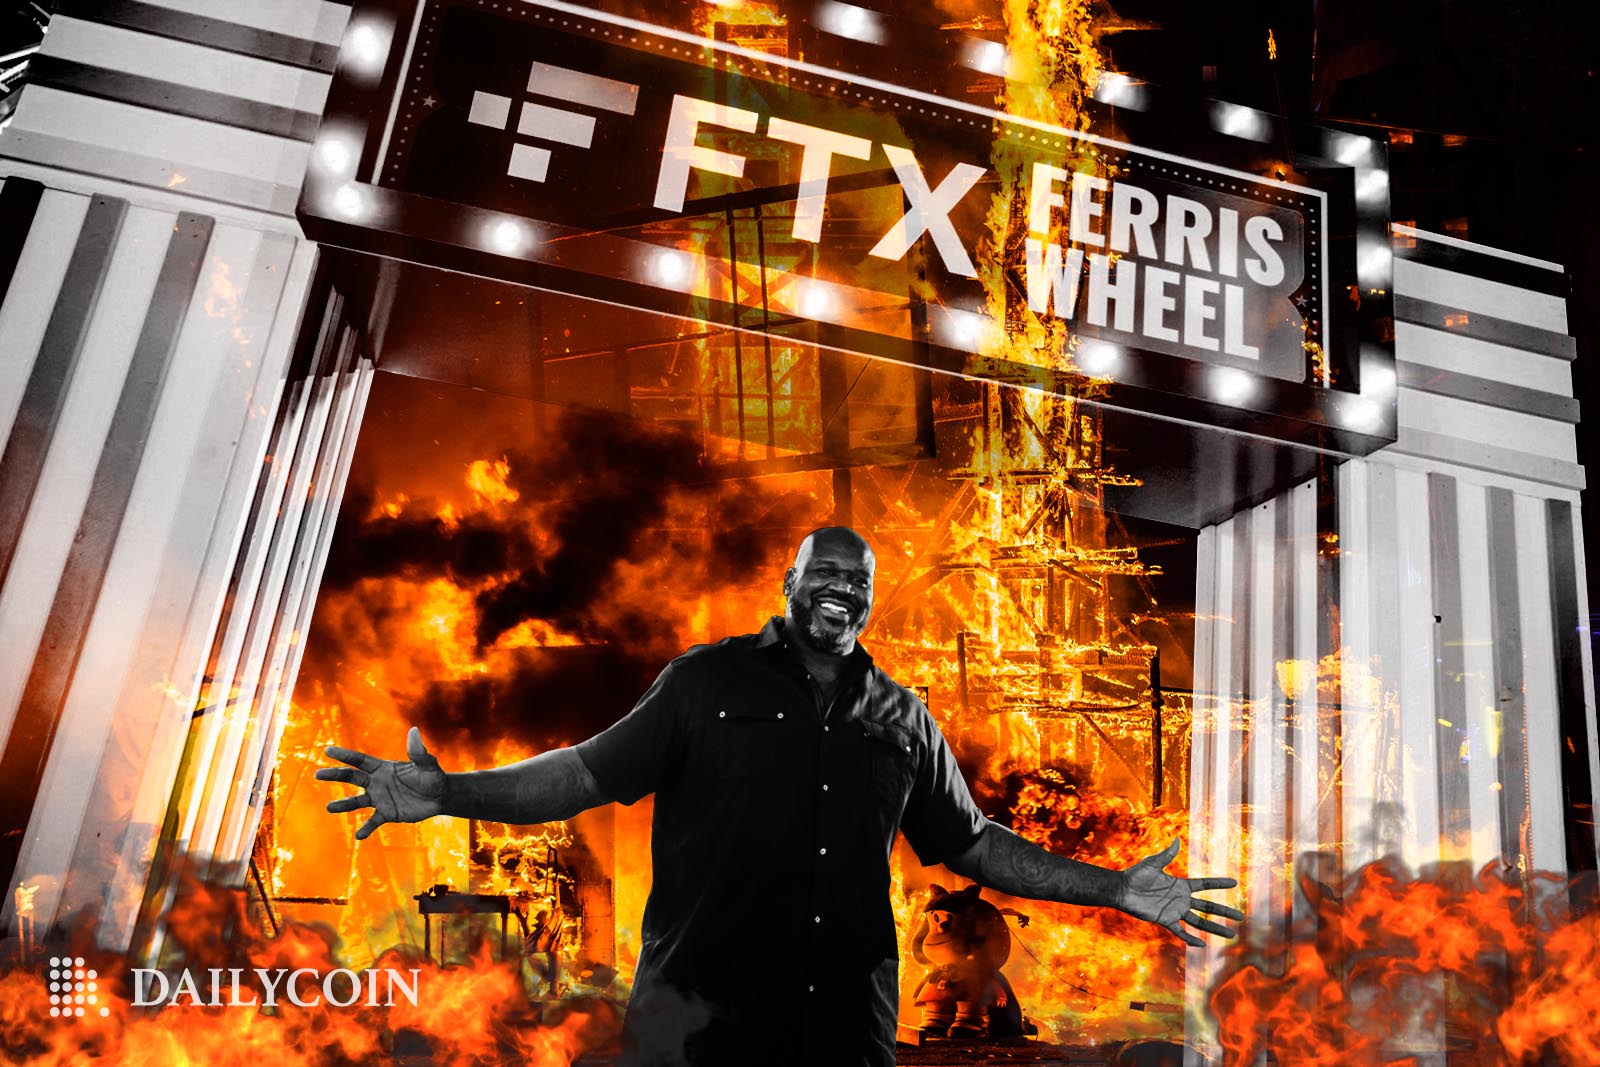 Shaquille O'Neal smiling in front of a burning FTX exchange.